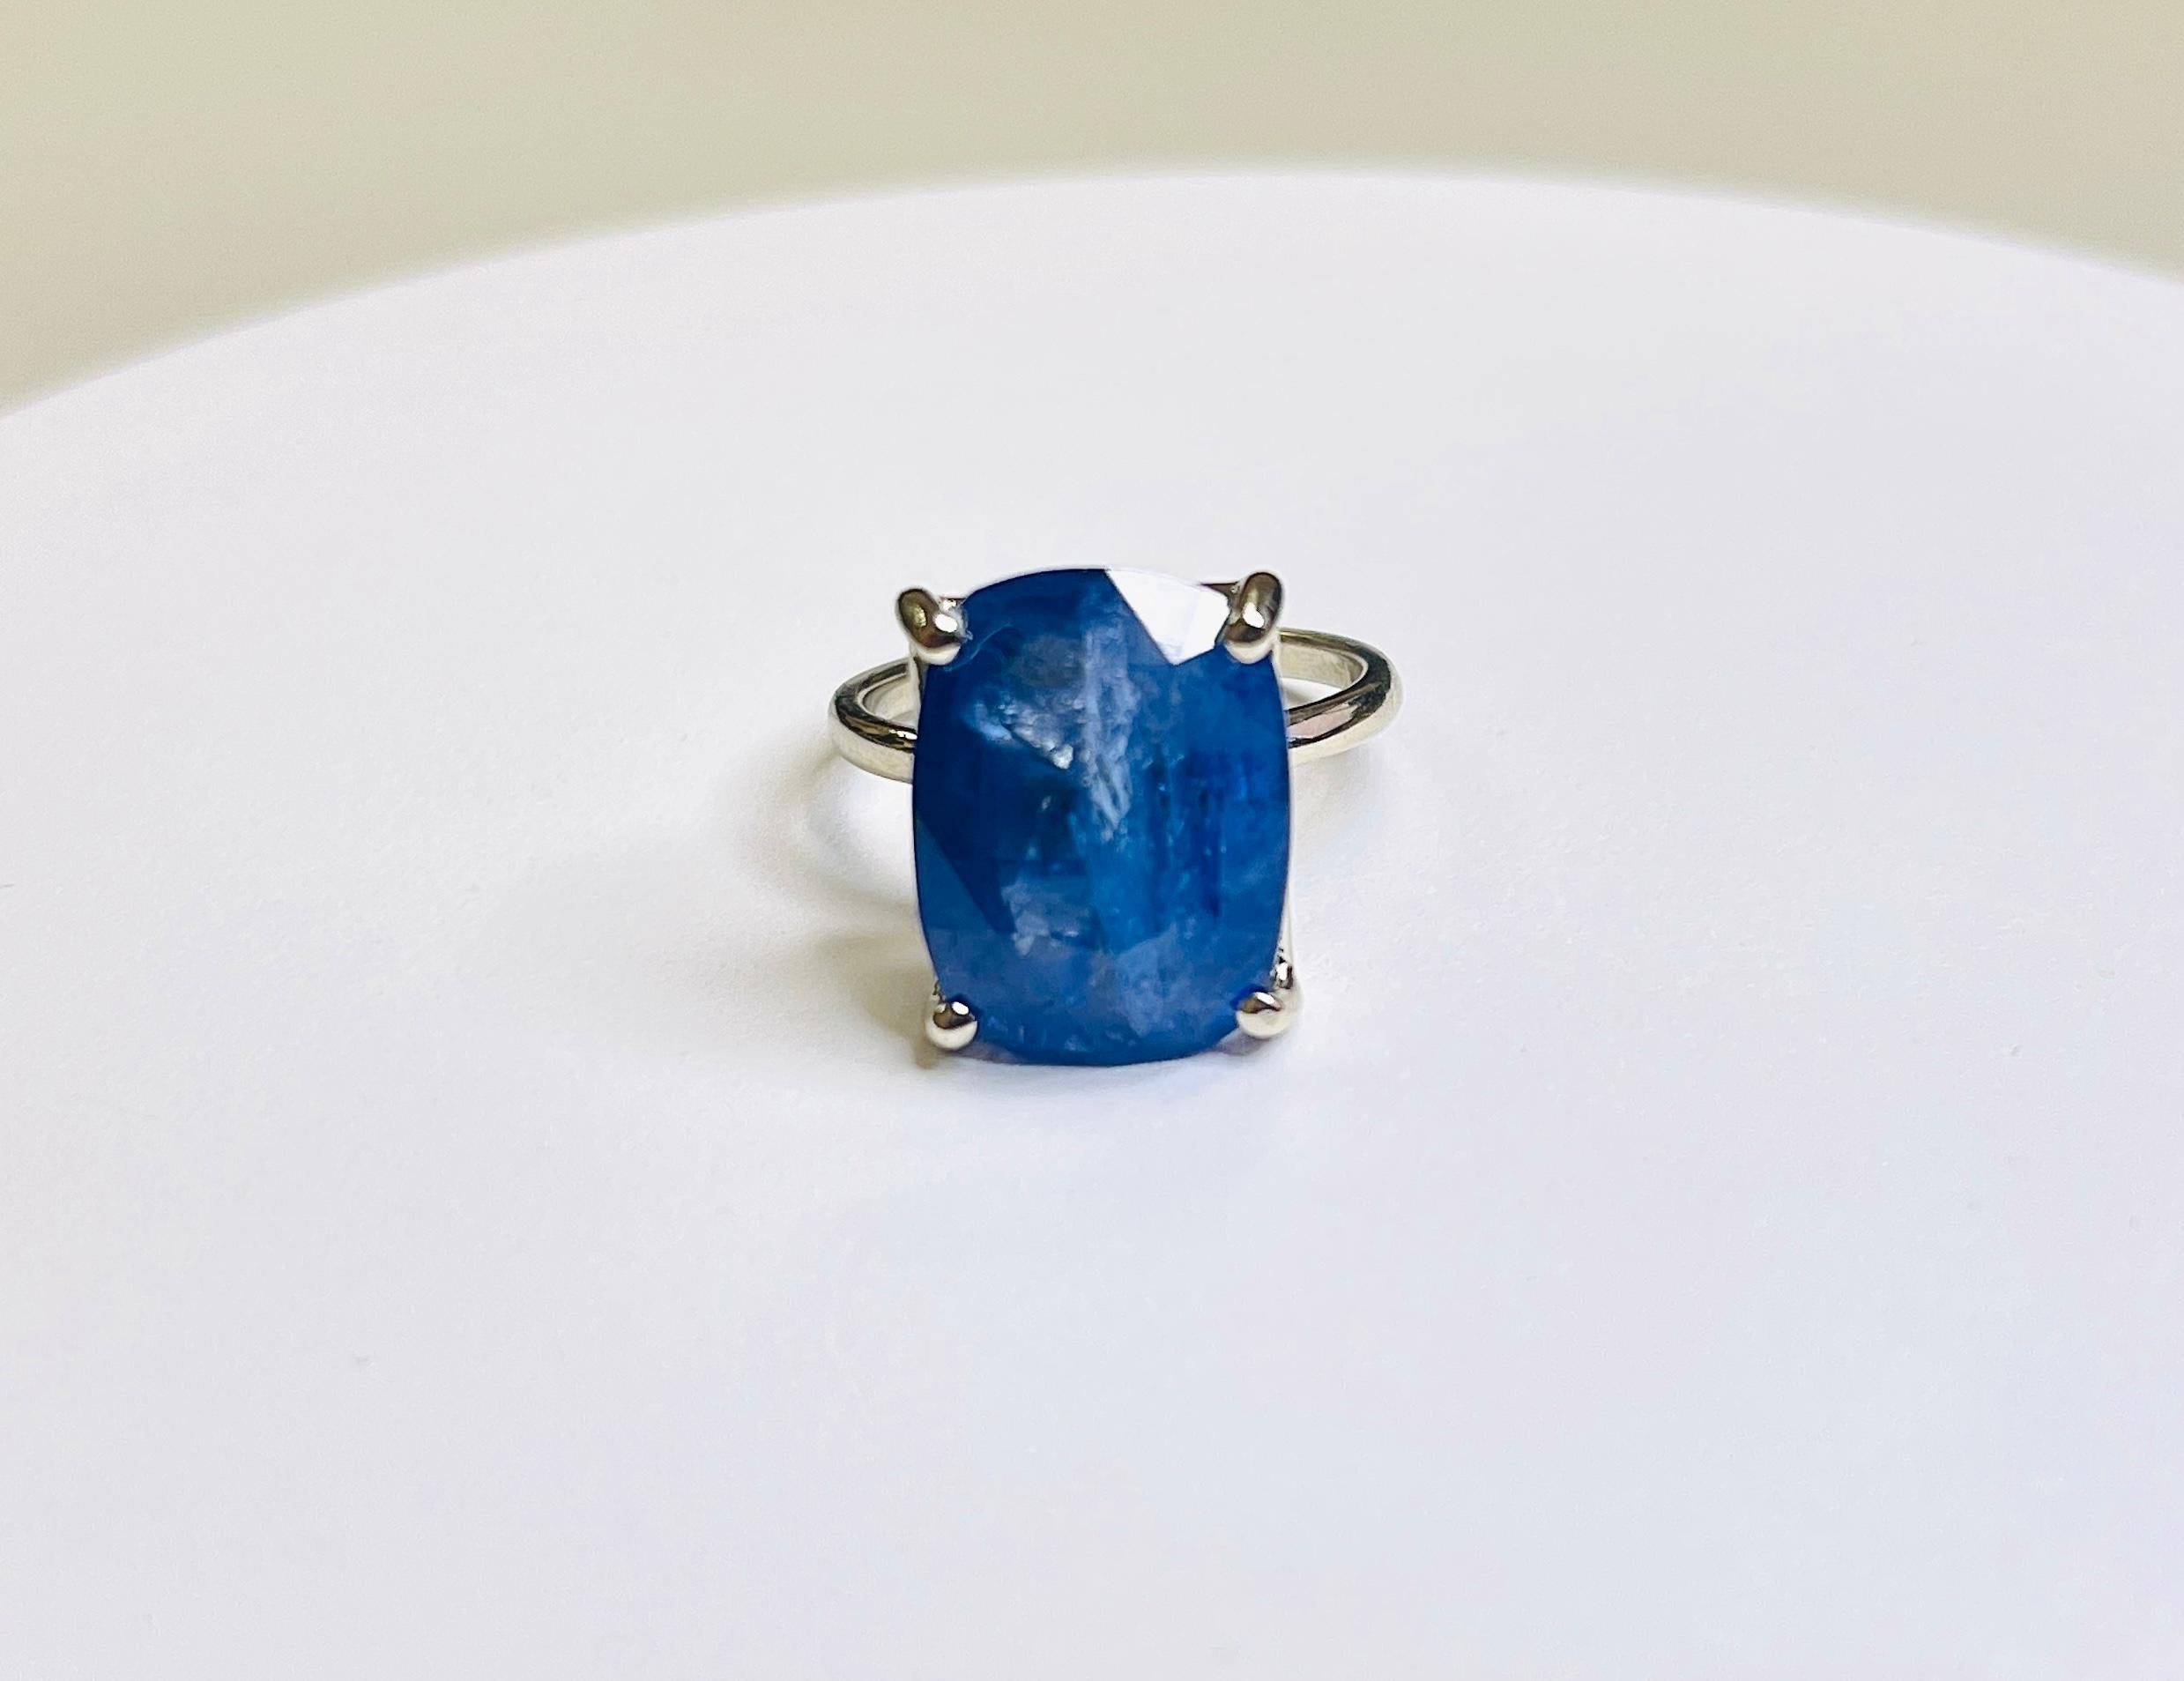 13.42 Carat Intense Blue Cushion Cut Natural Sapphire 14K White Gold Ring In New Condition For Sale In Great Neck, NY